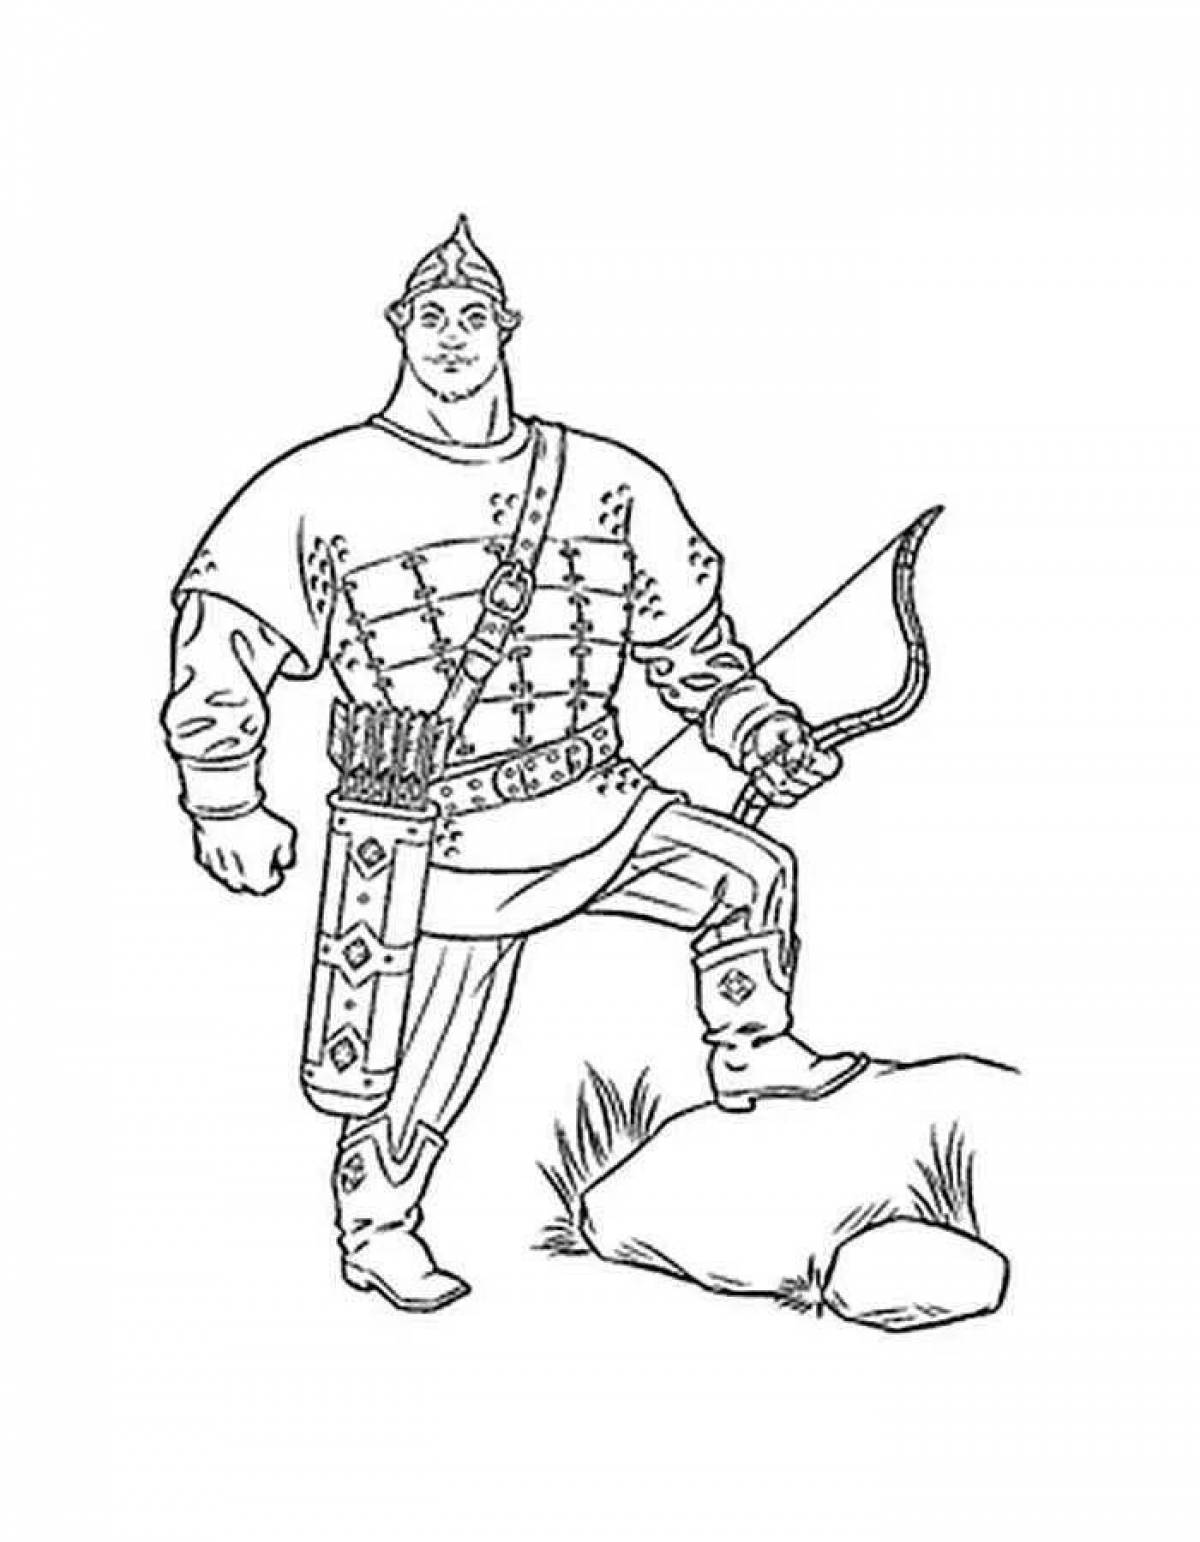 Great coloring book heroes of the Russian land